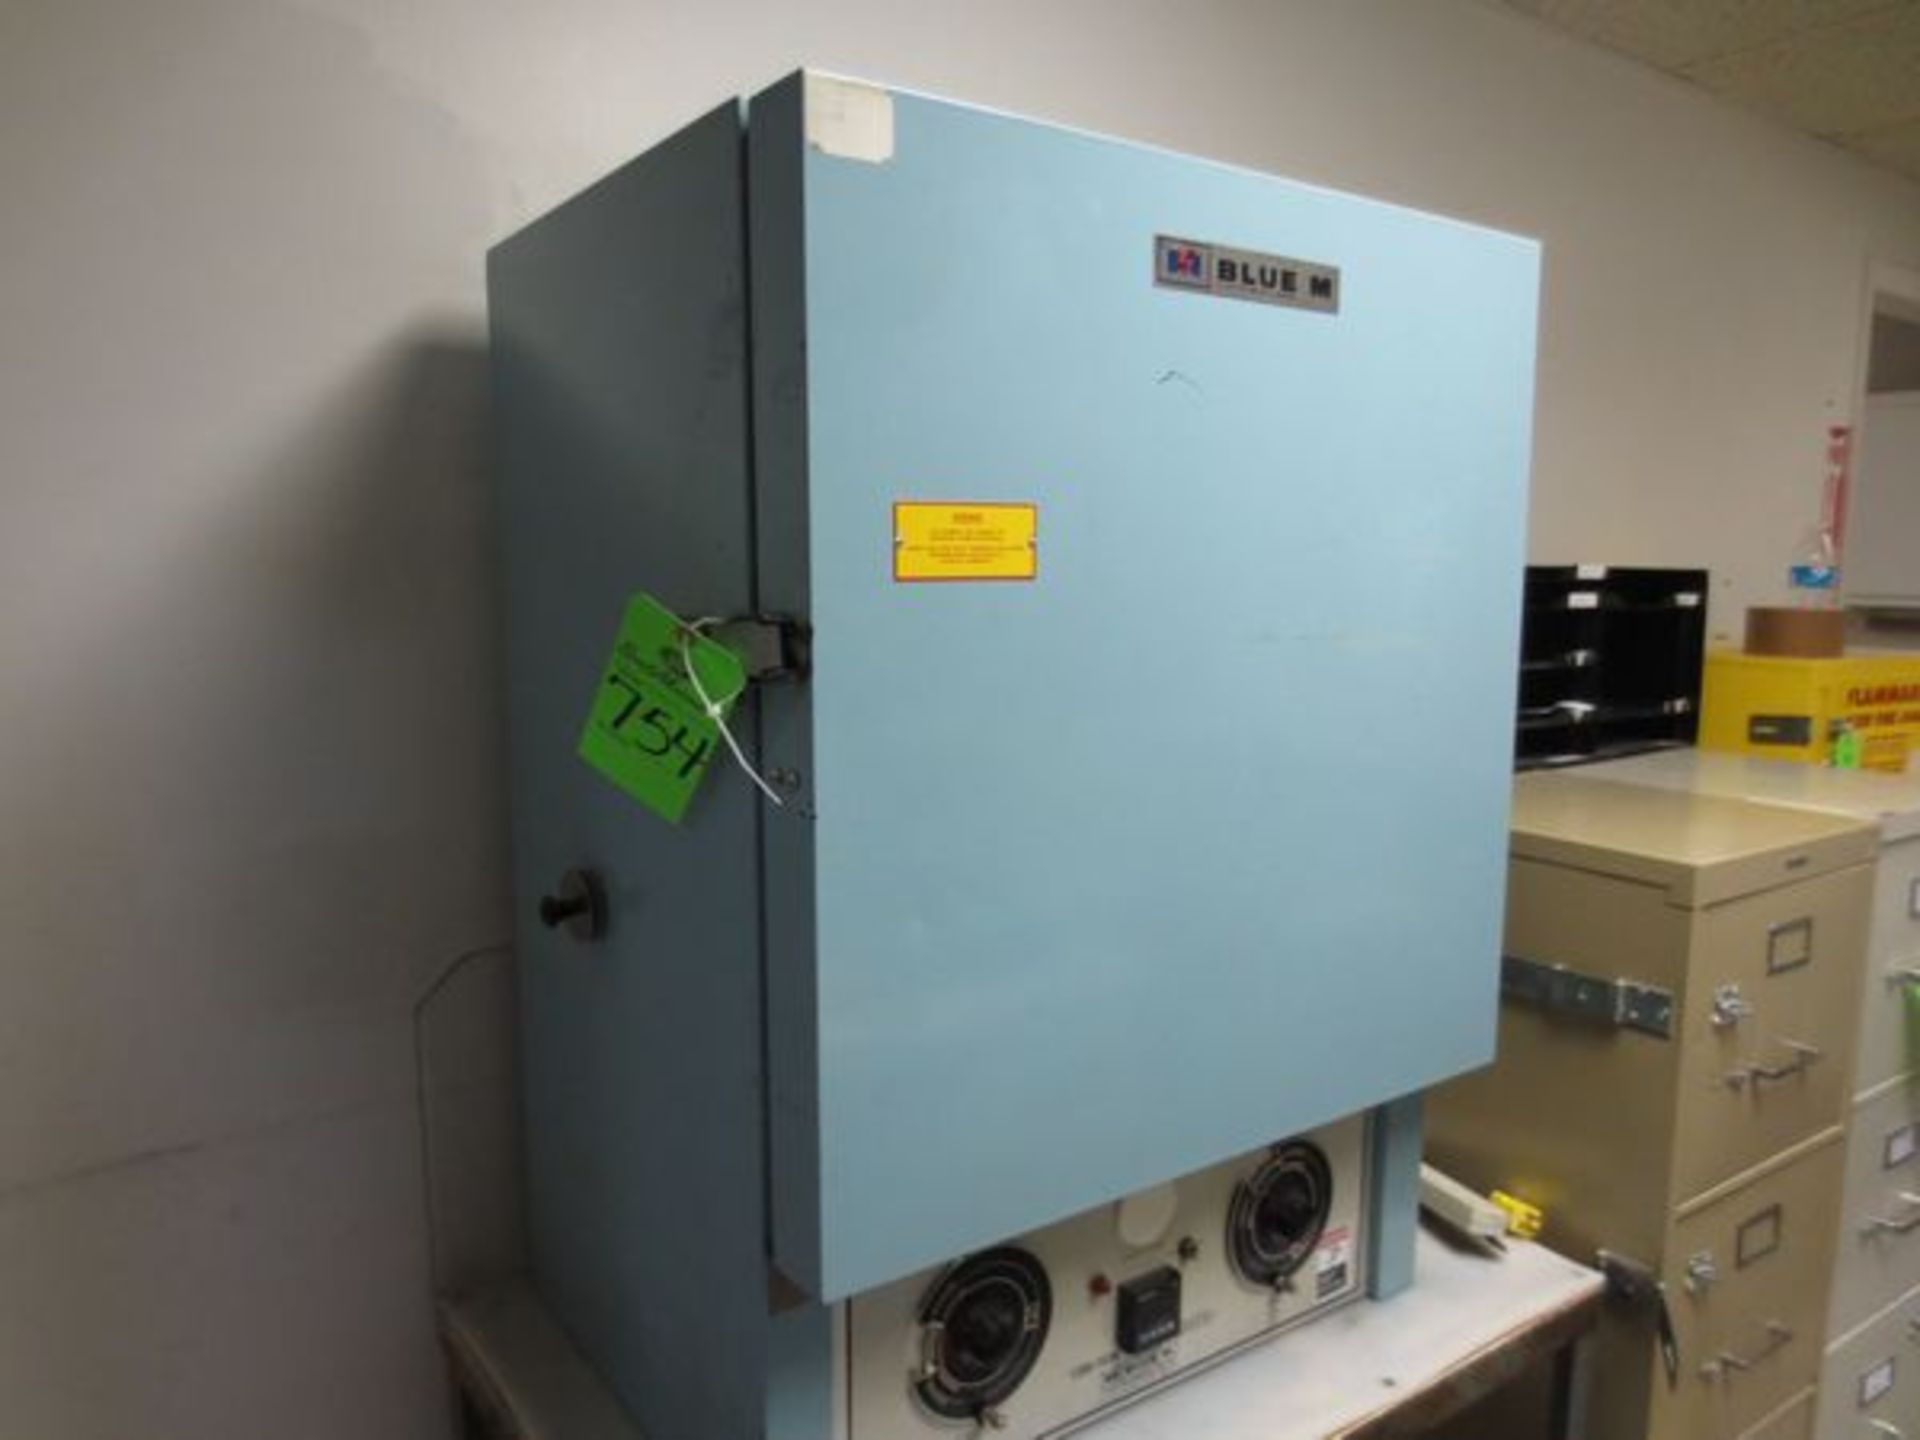 Blue M Constant temputure cabinet   ***(Late Delivery July 28)***